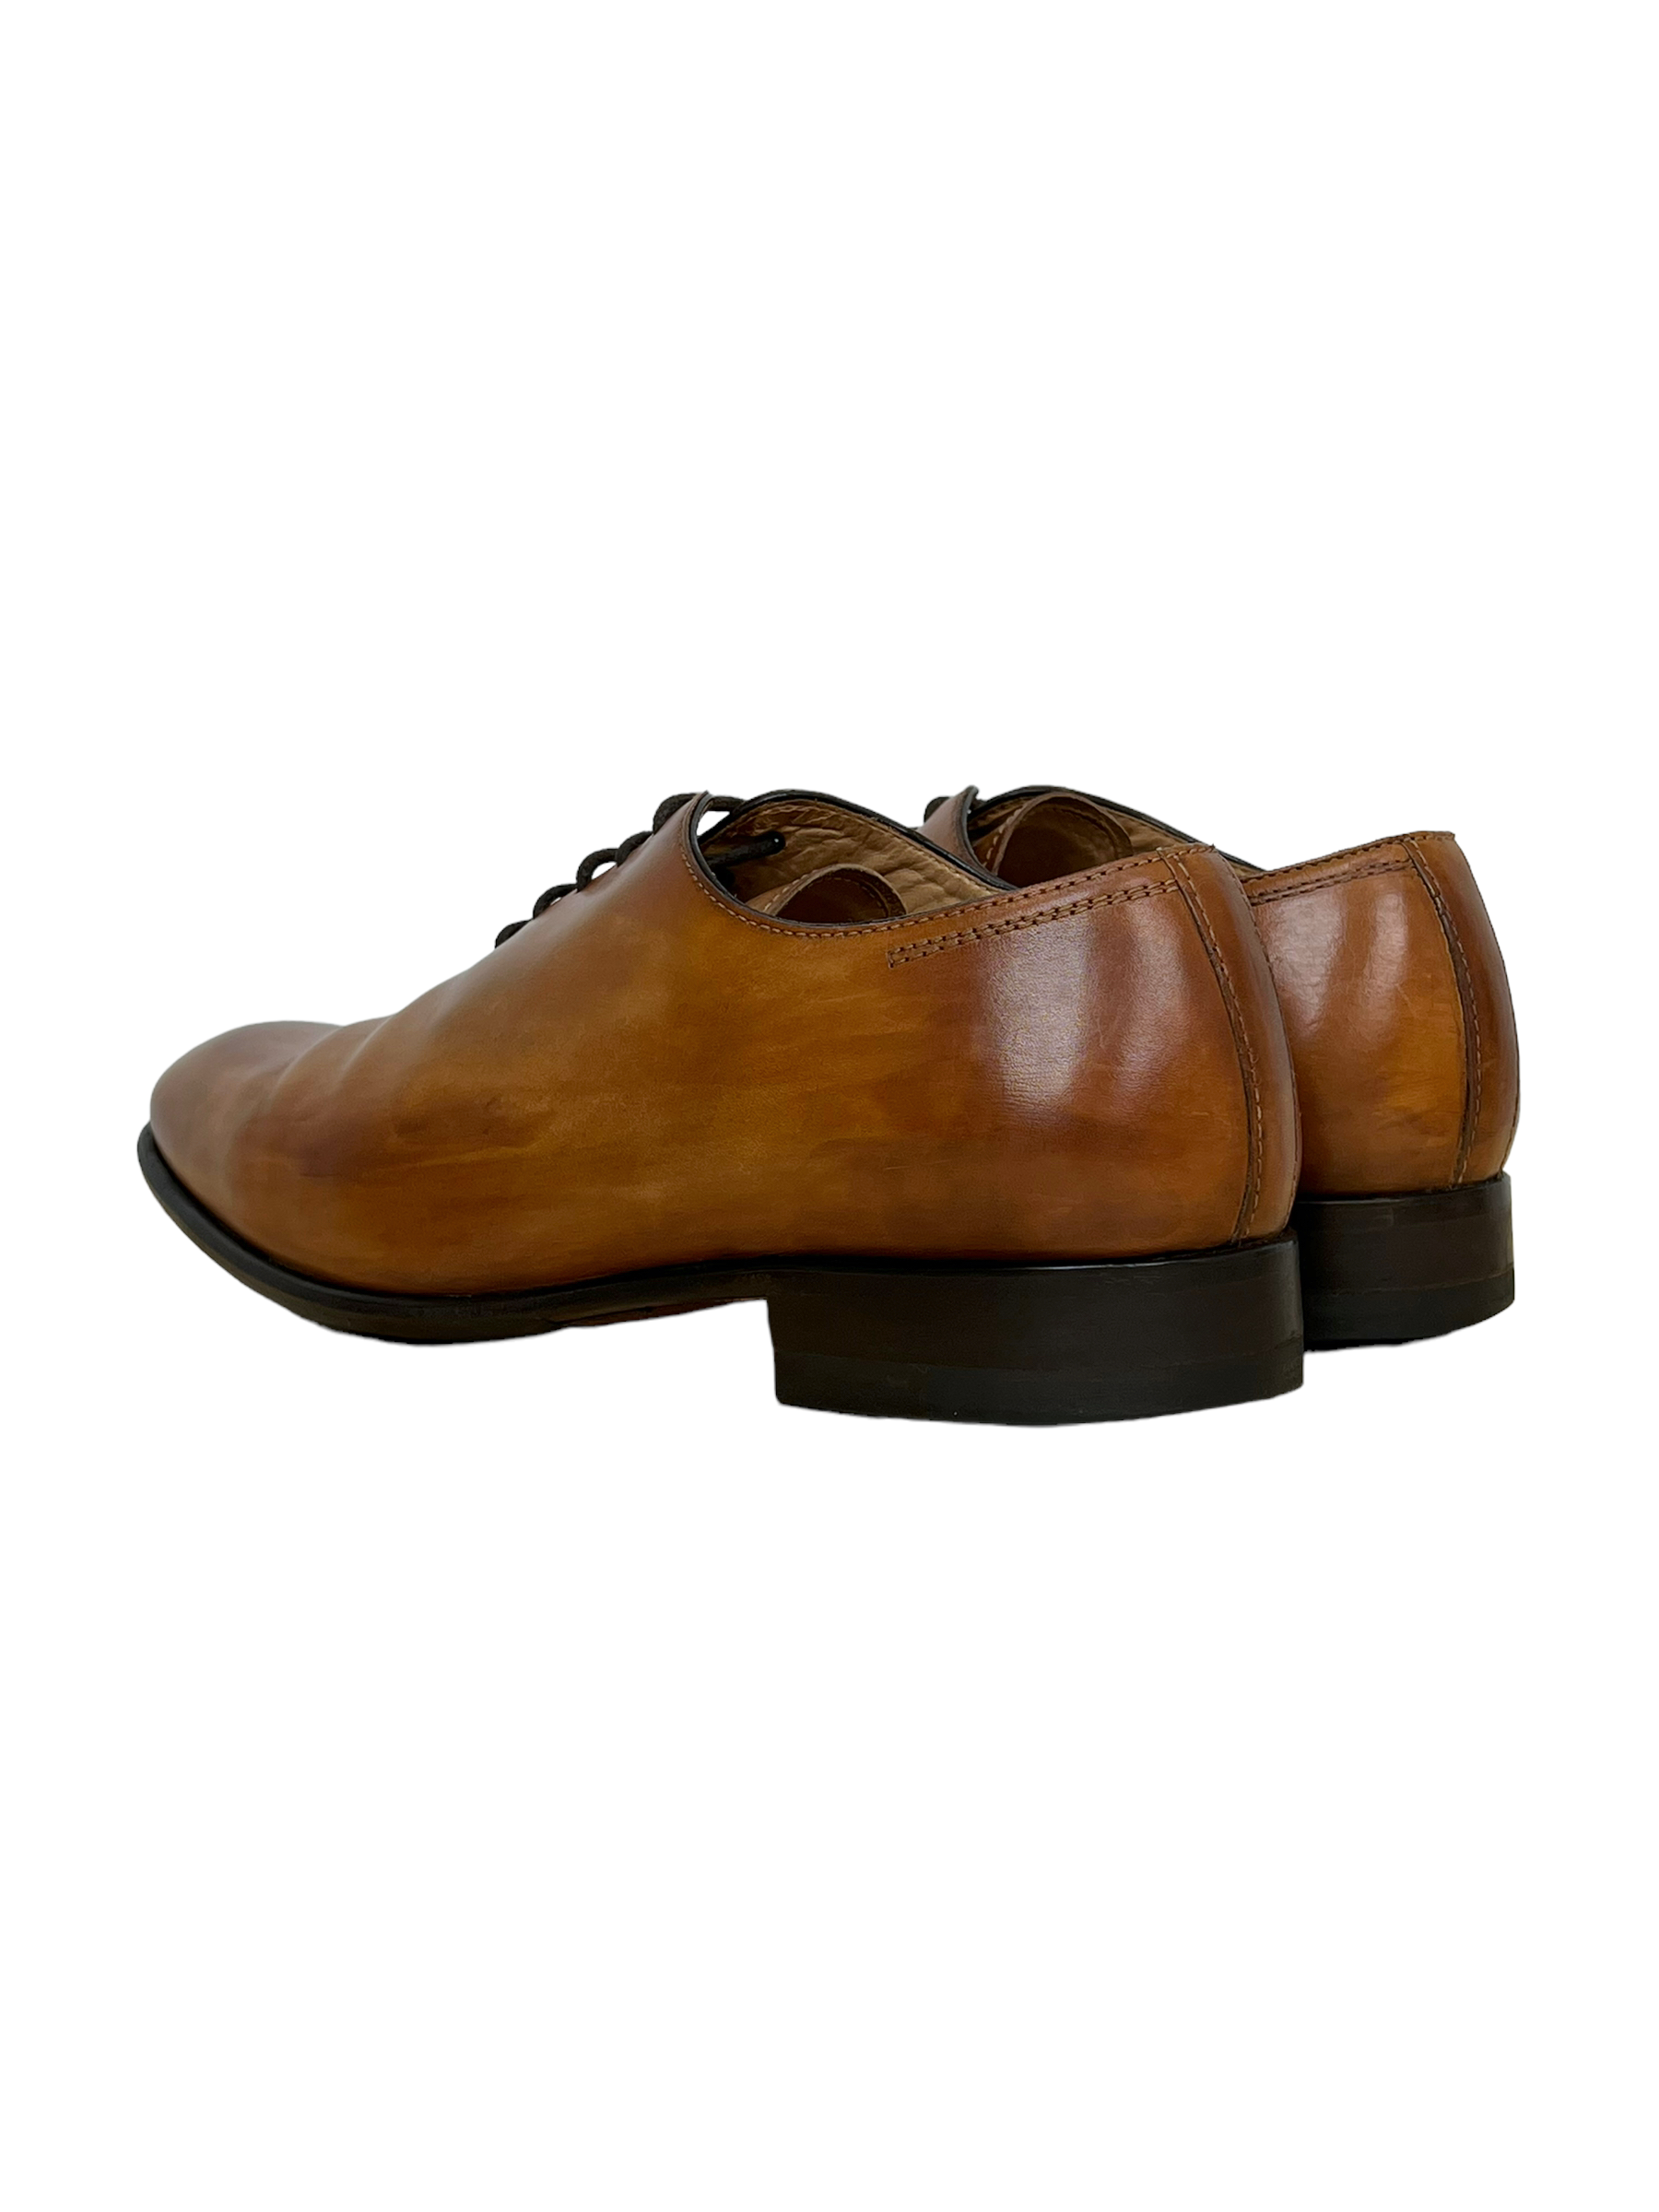 Harry Rosen Brown Whole Cut Oxford Dress Shoe - Genuine Design Luxury Consignment for Men. New & Pre-Owned Clothing, Shoes, & Accessories. Calgary, Canada